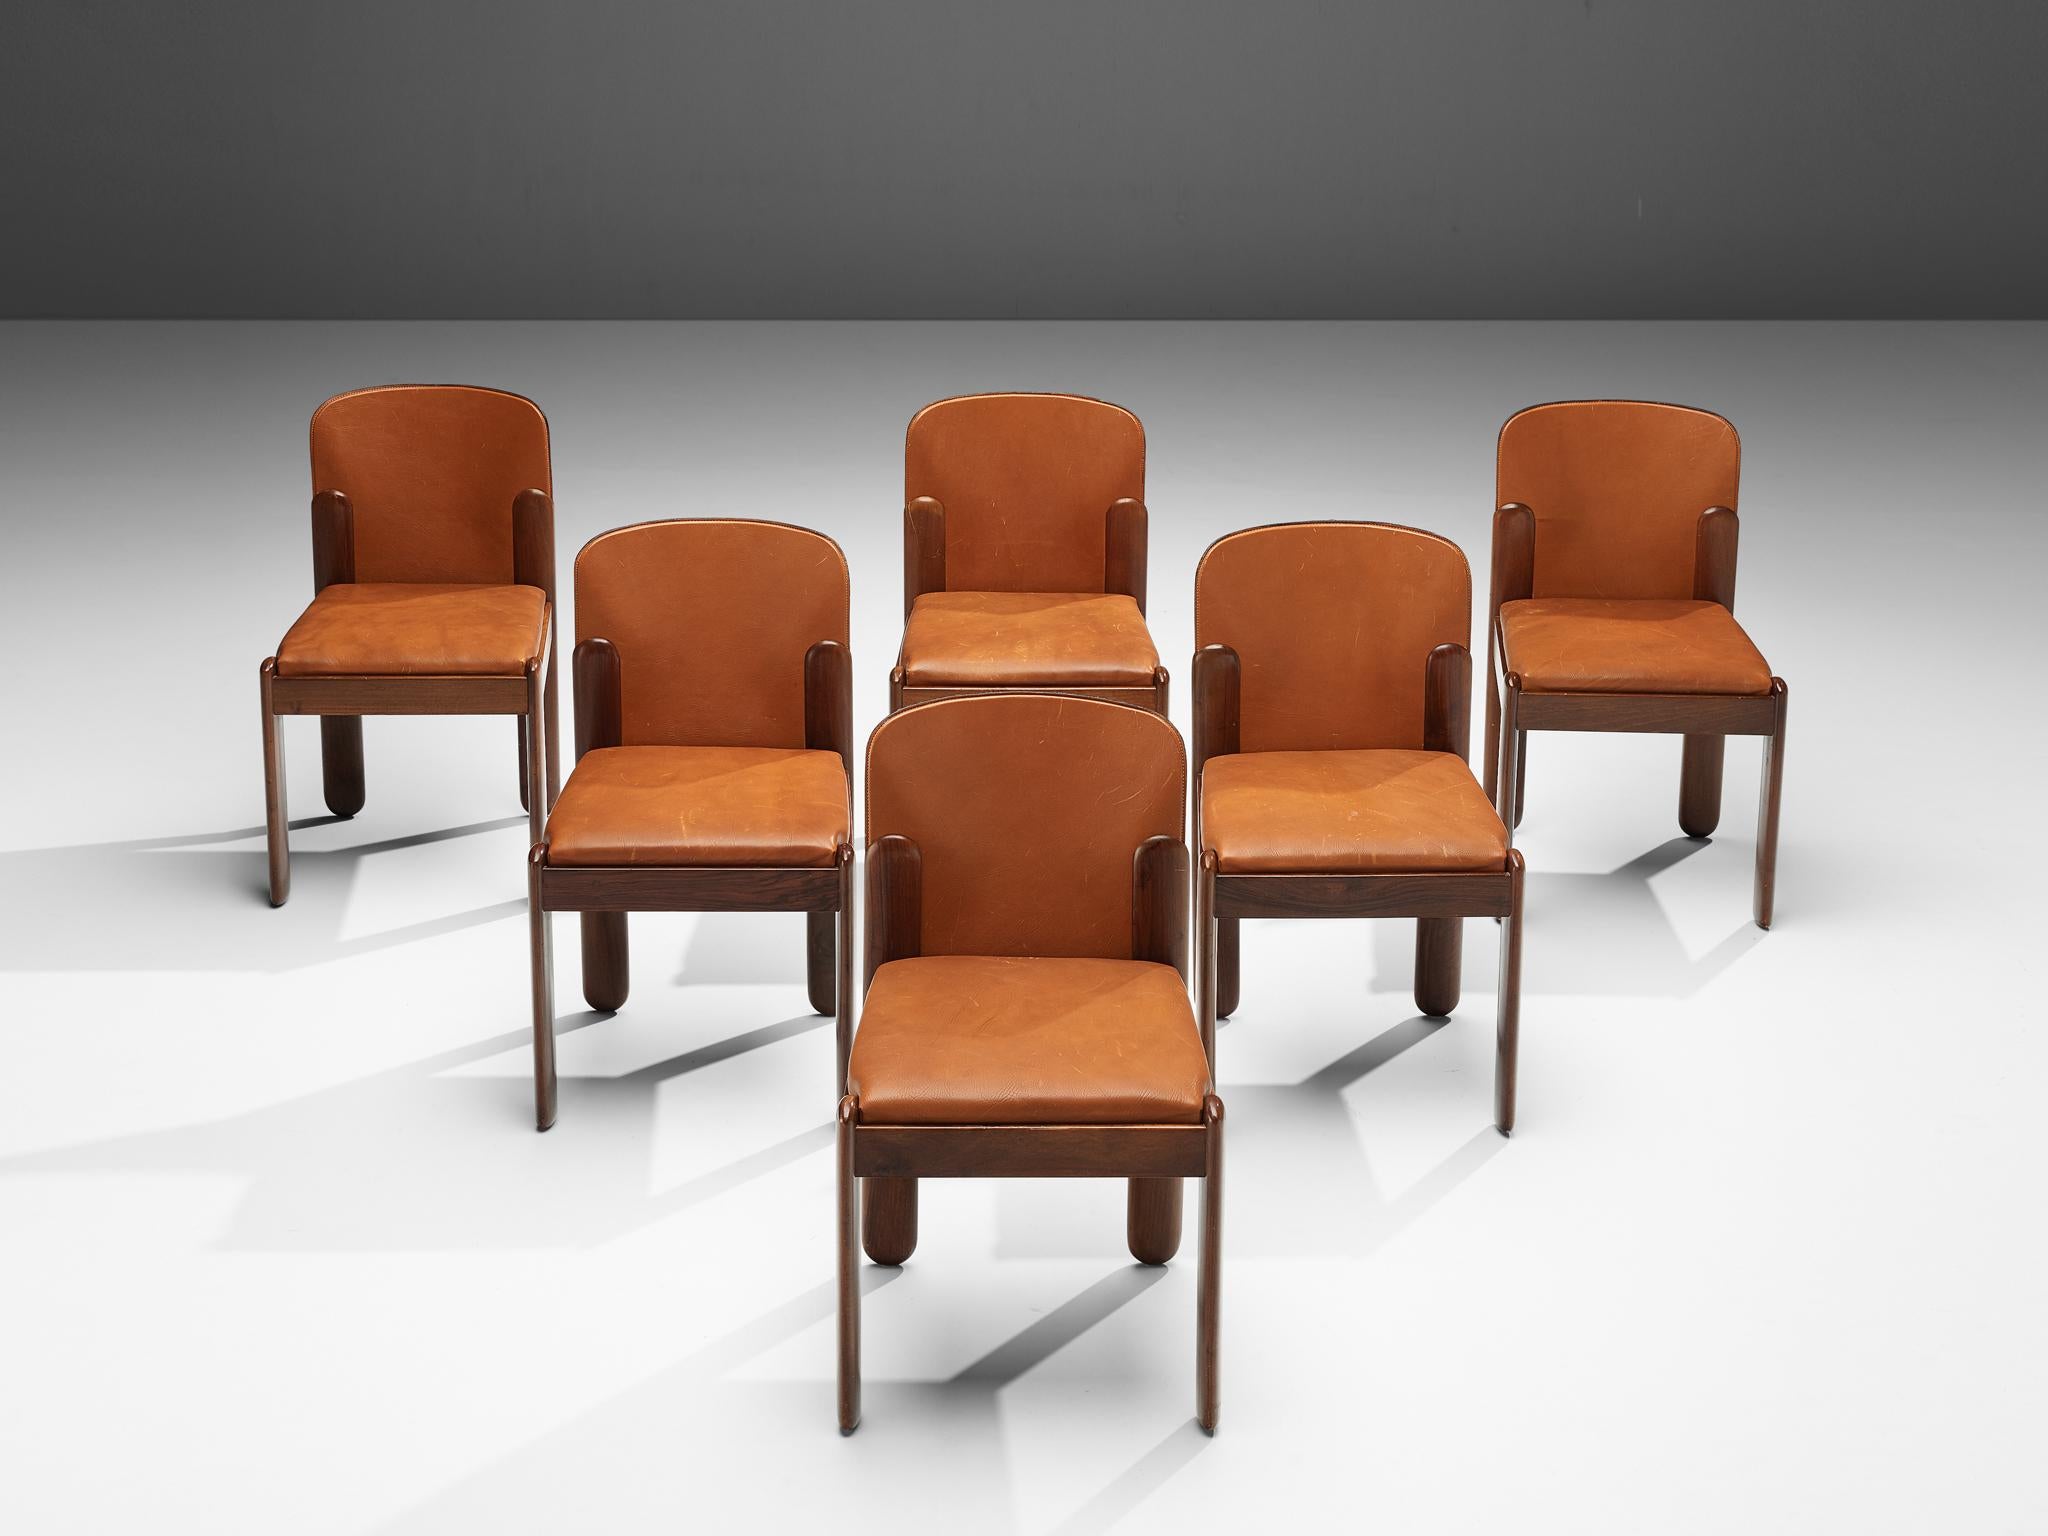 Silvio Coppola for Bernini Italy, set of six dining chairs, cognac leather and walnut, Italy, 1960s.

This set of six dining chairs is designed by Italian designer Silvio Coppola. These chairs have a cubic and architectural appearance. The base